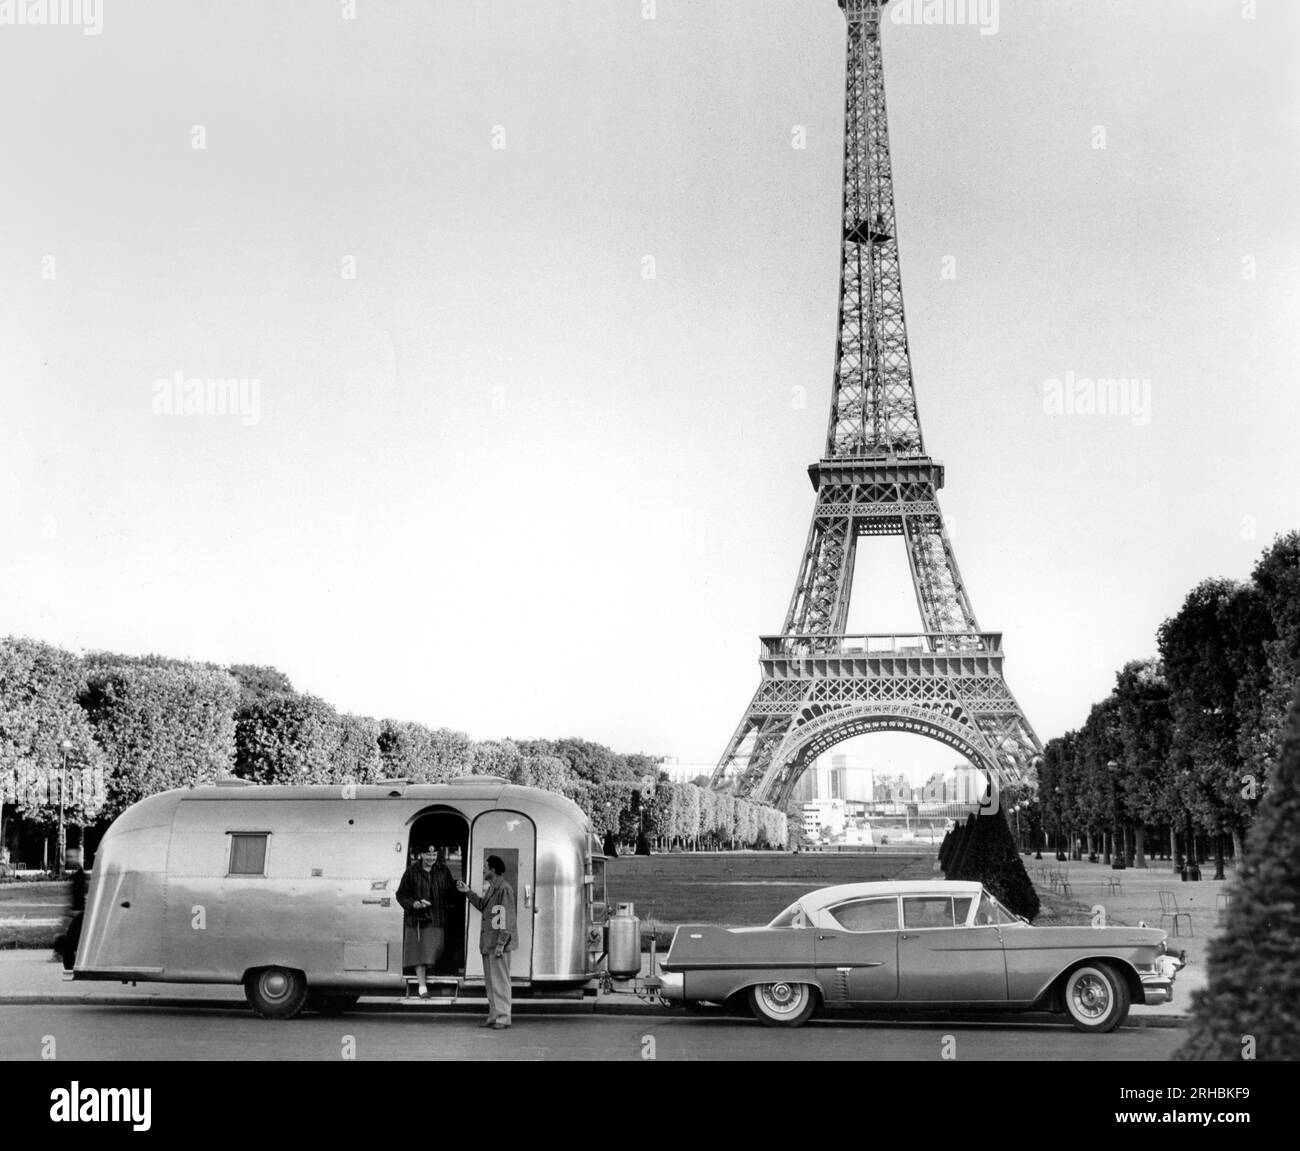 Airstream Trailer parked in front of the Eiffel Tower in Paris, France  Stock Photo - Alamy